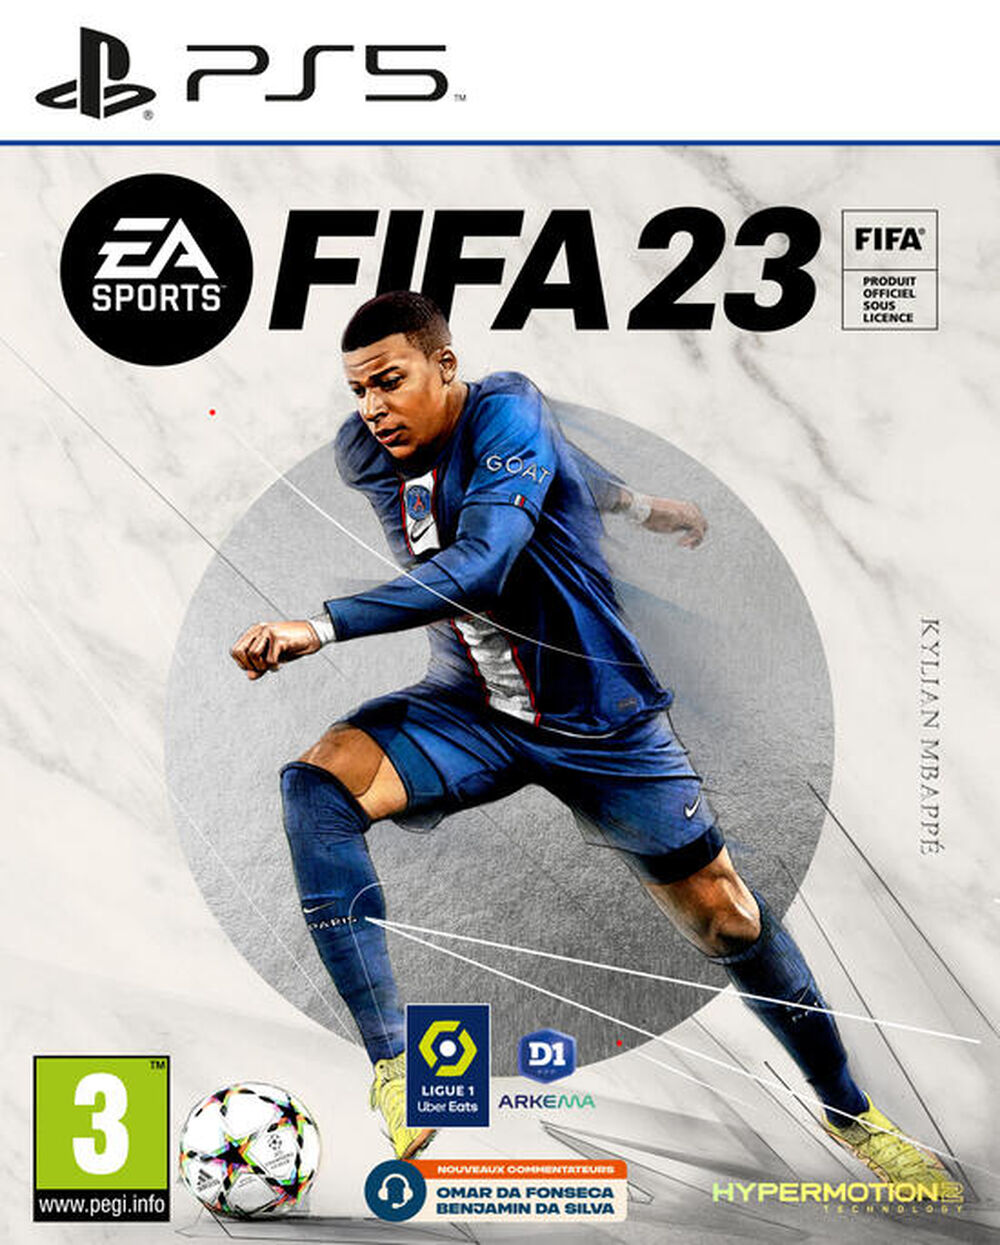 PS5 FIFA 23 FOR SALE